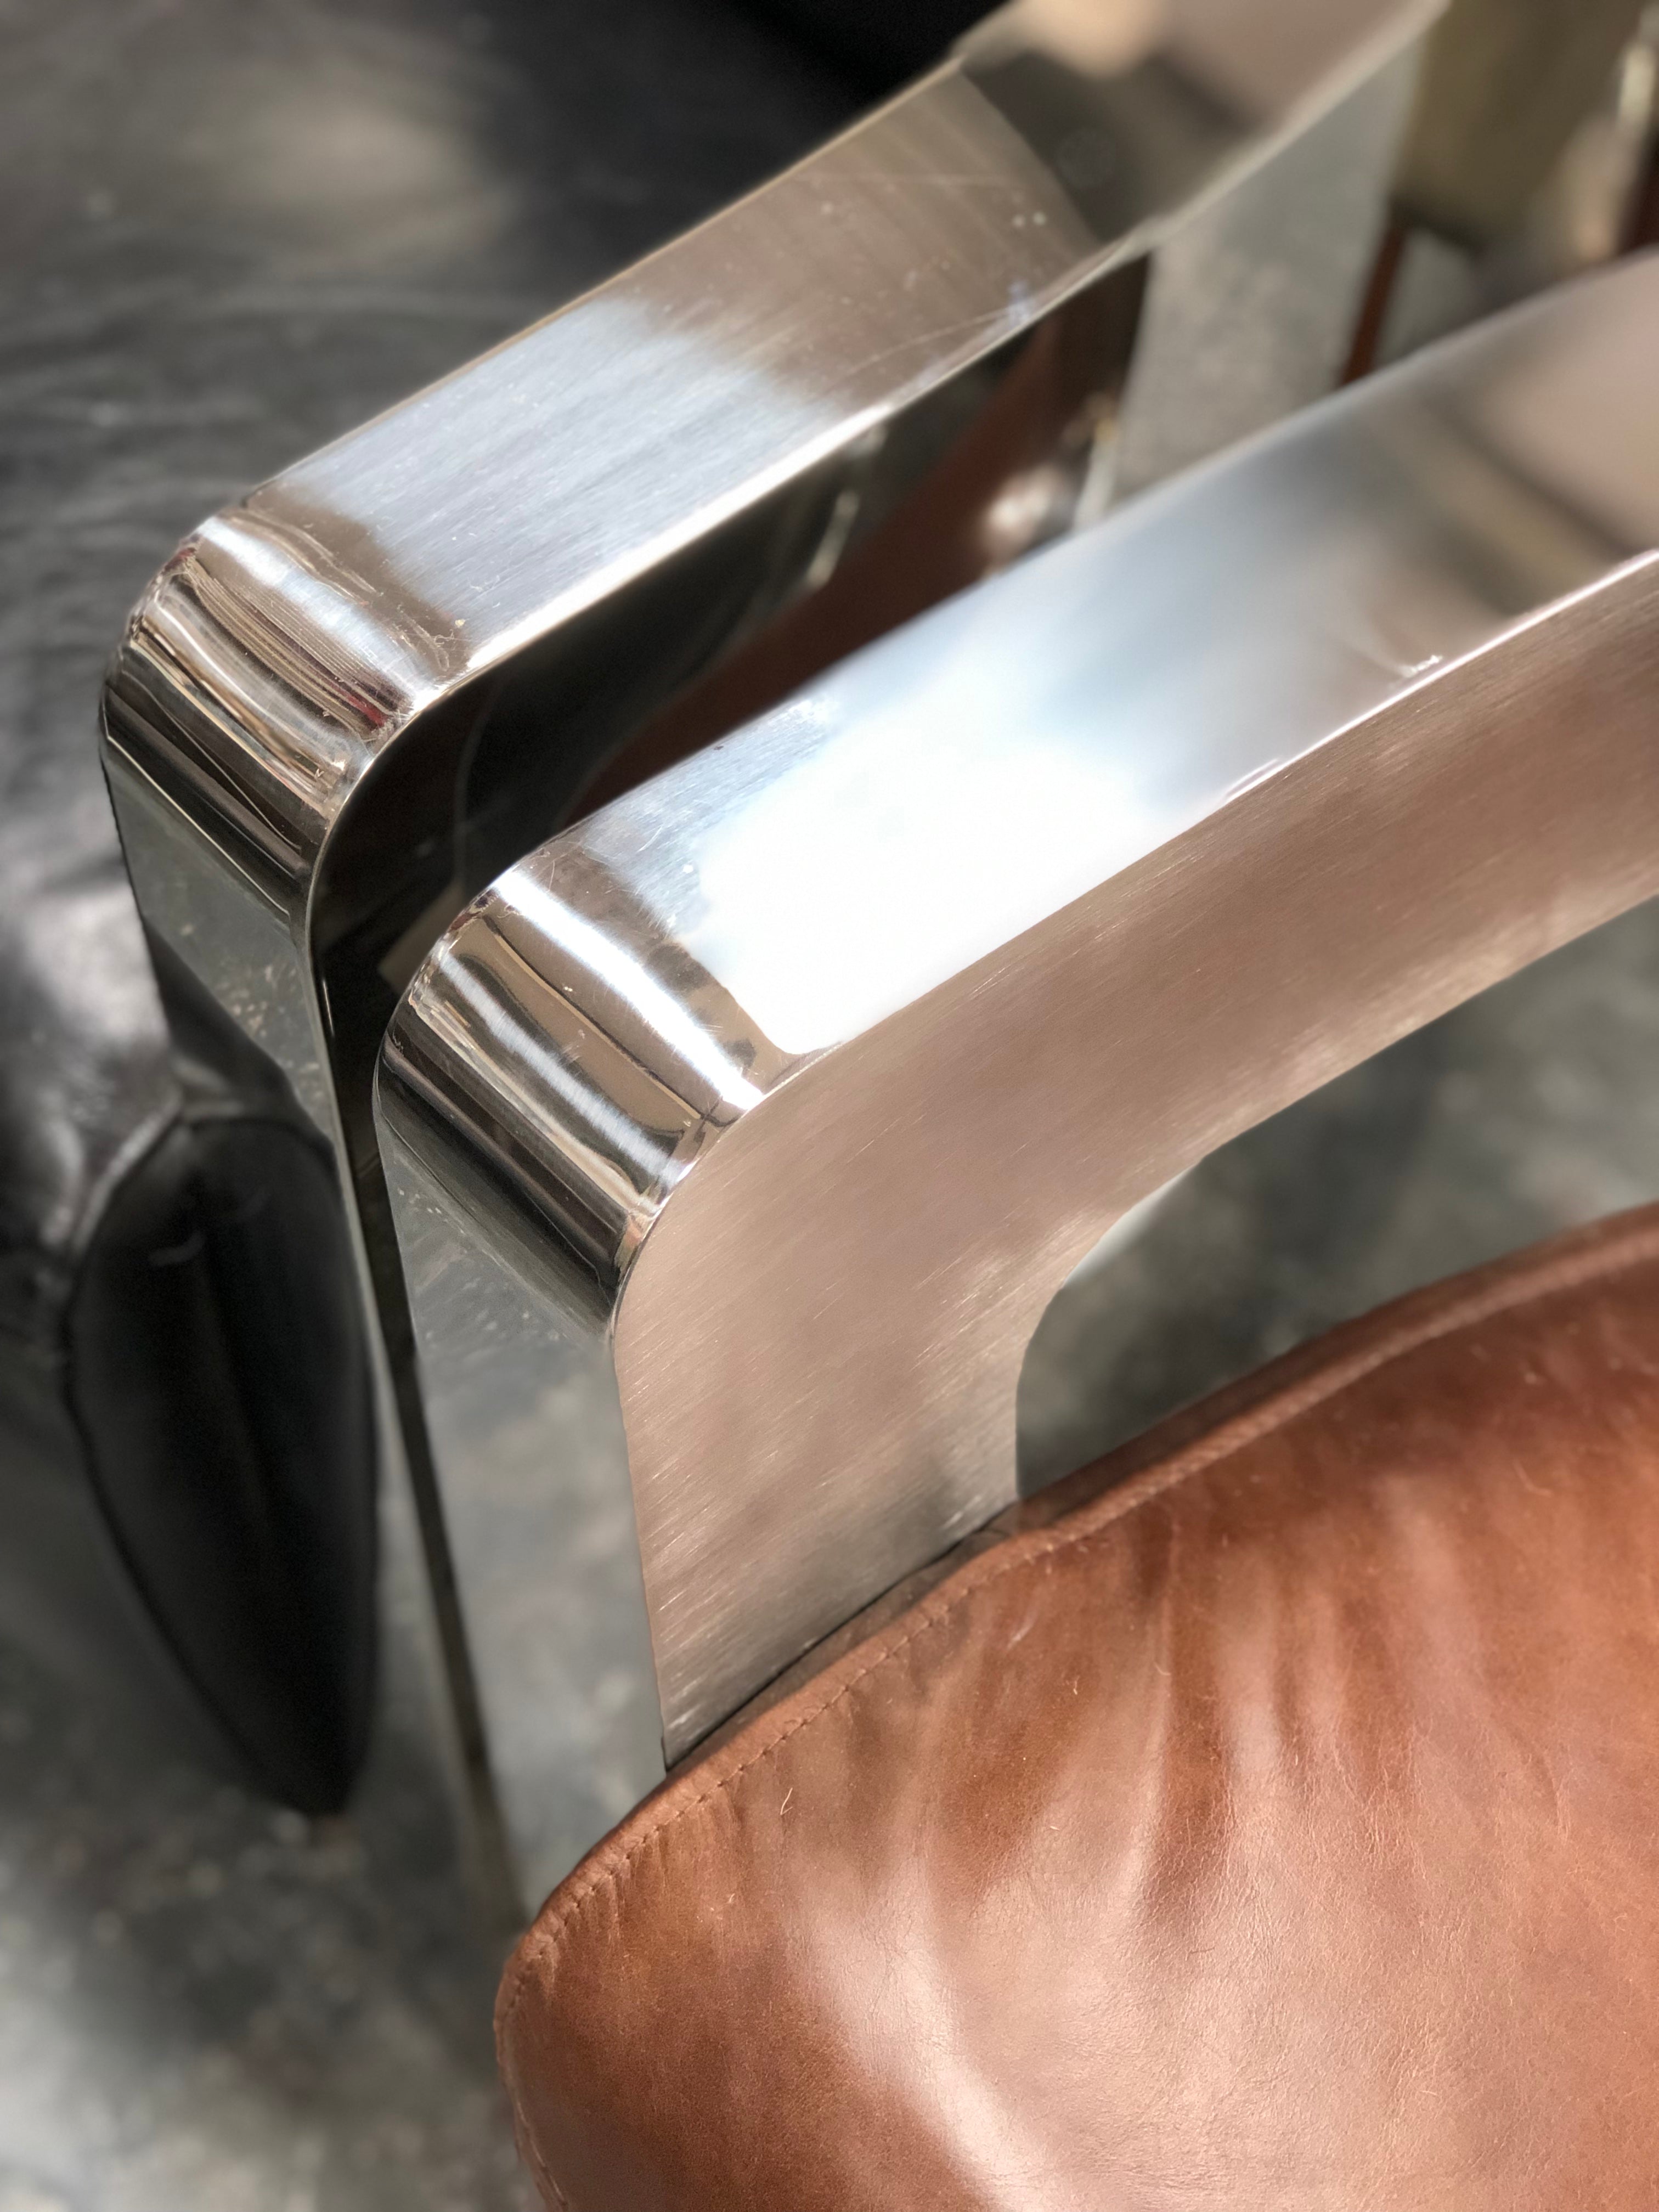 Halo Mars leather Chair from Top Secret Furniture